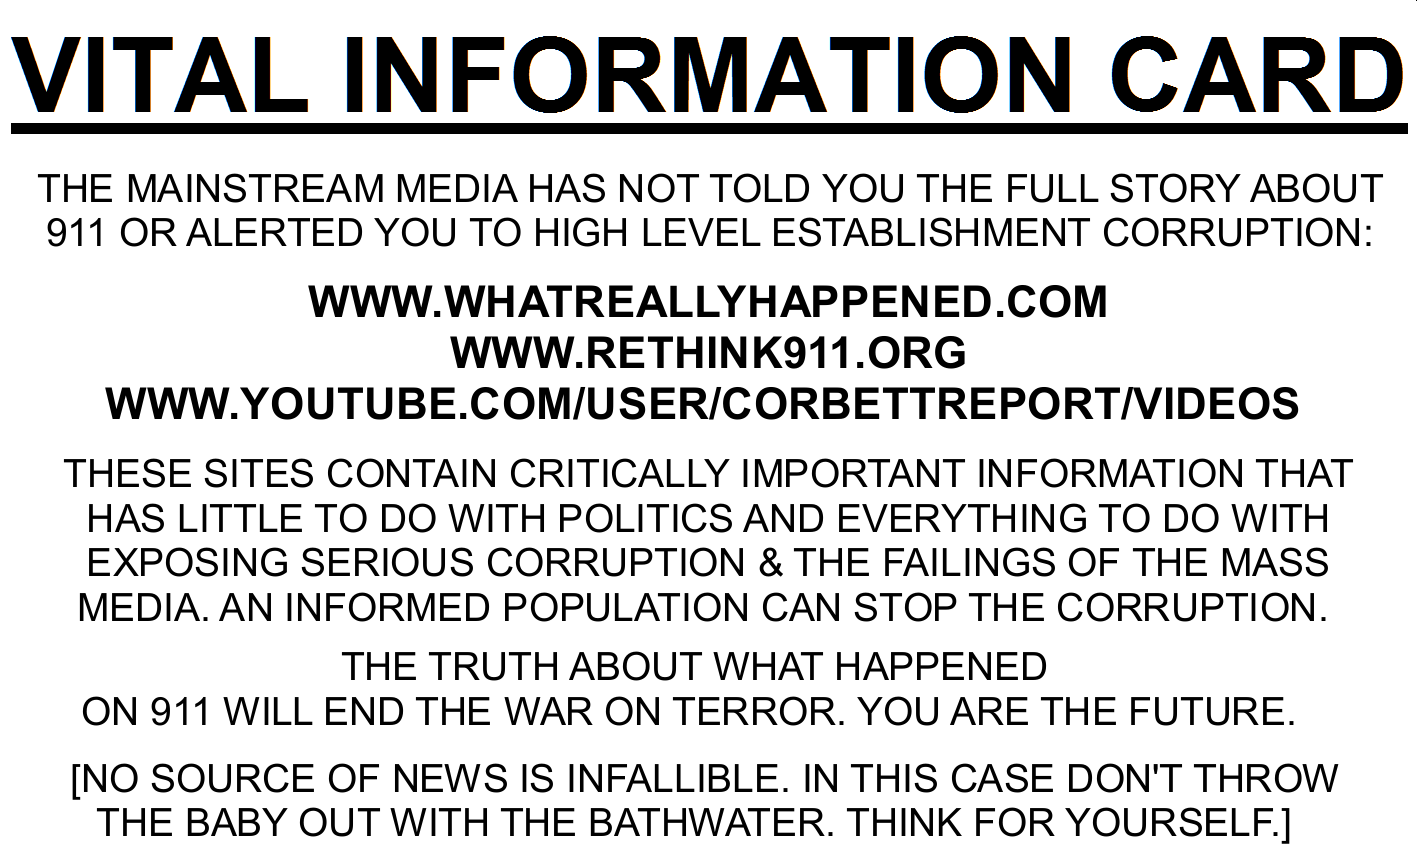 911 Truth and Anti-Corruption Vital Information 'BUSINESS CARD': Street Action Promo Material